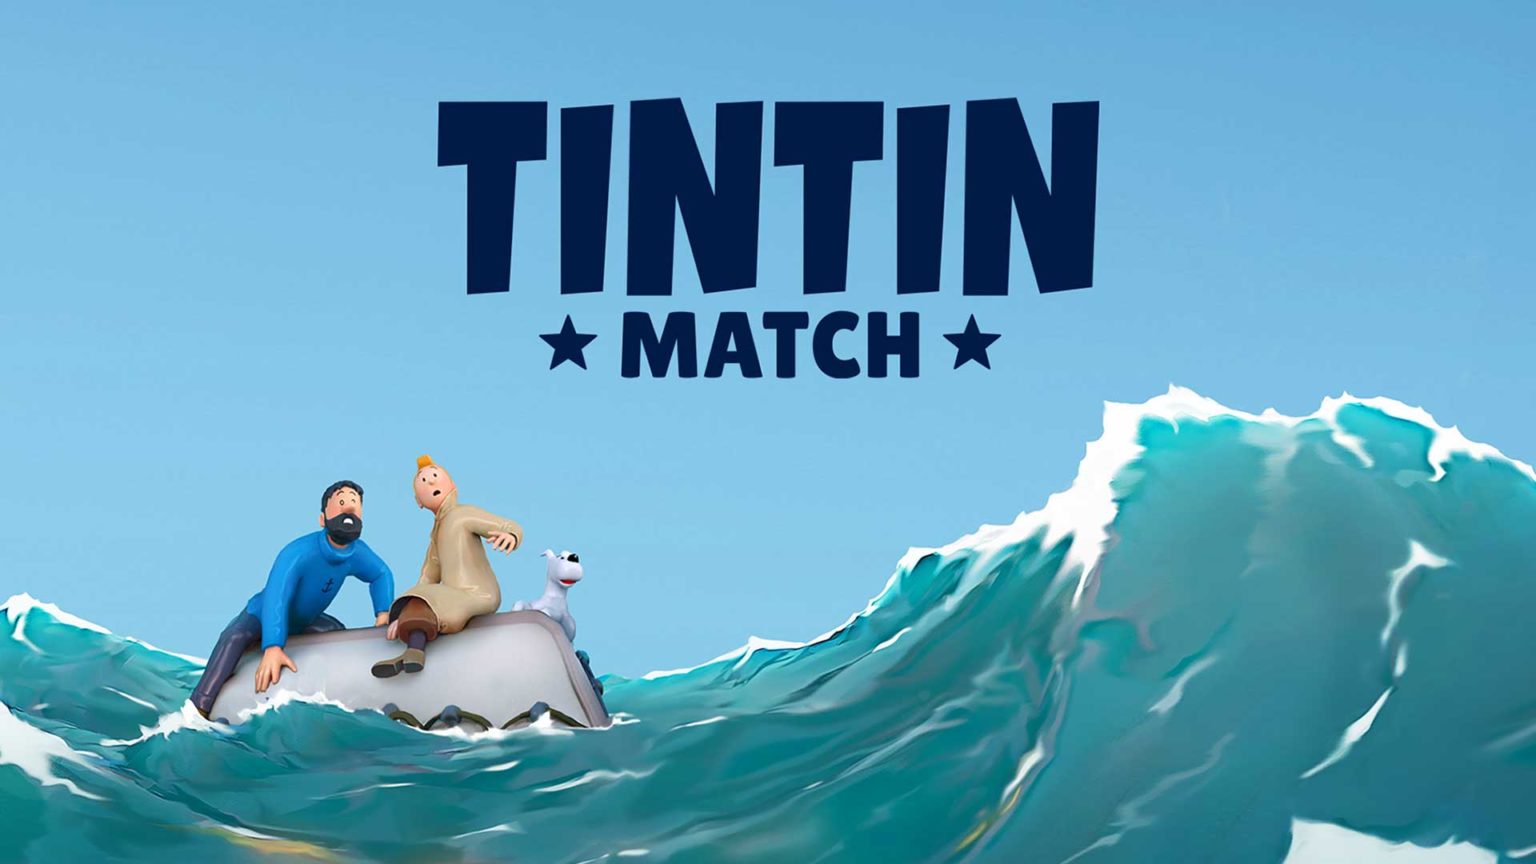 Tintin puzzle game is available for Android and iOS